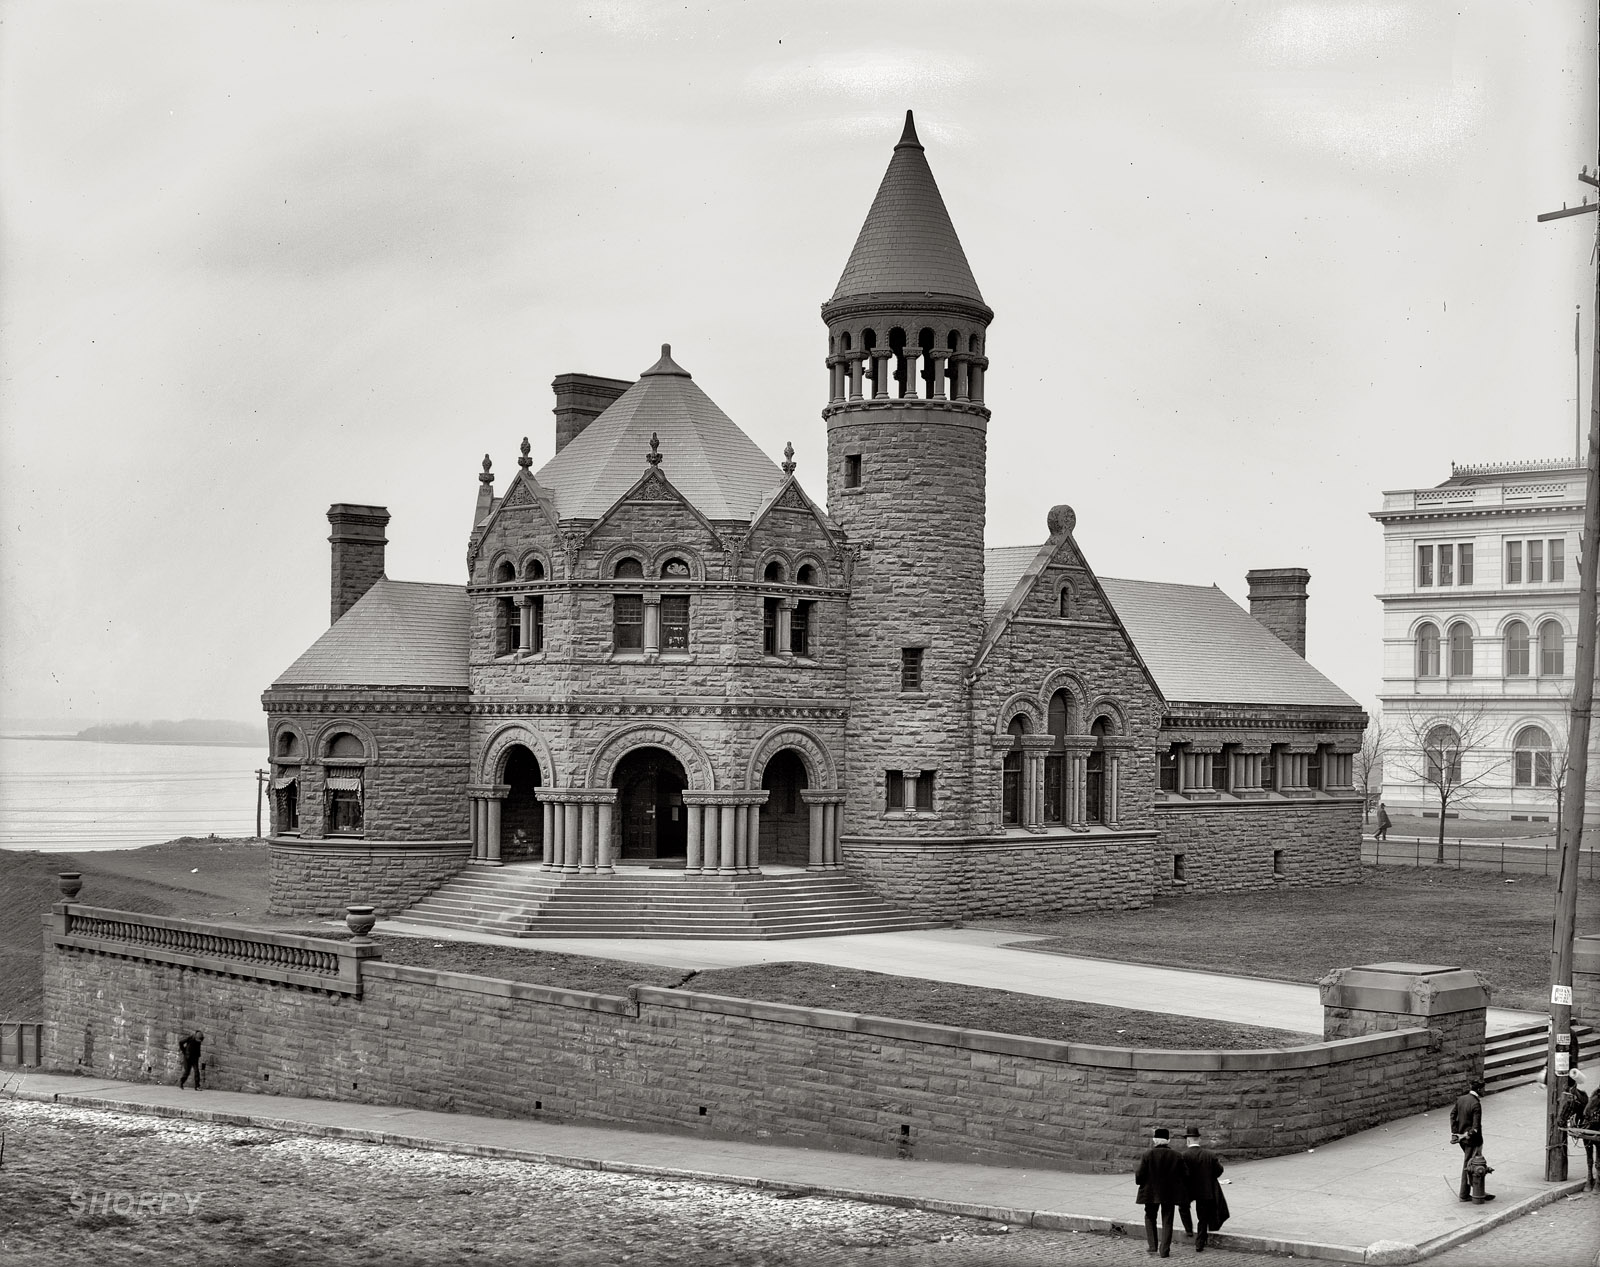 Circa 1906. "Cossitt Library, Memphis." This Romanesque red sandstone structure, at Front and Monroe on the banks of the Mississippi, was Memphis's first public library when it opened in 1893. Detroit Publishing. View full size.